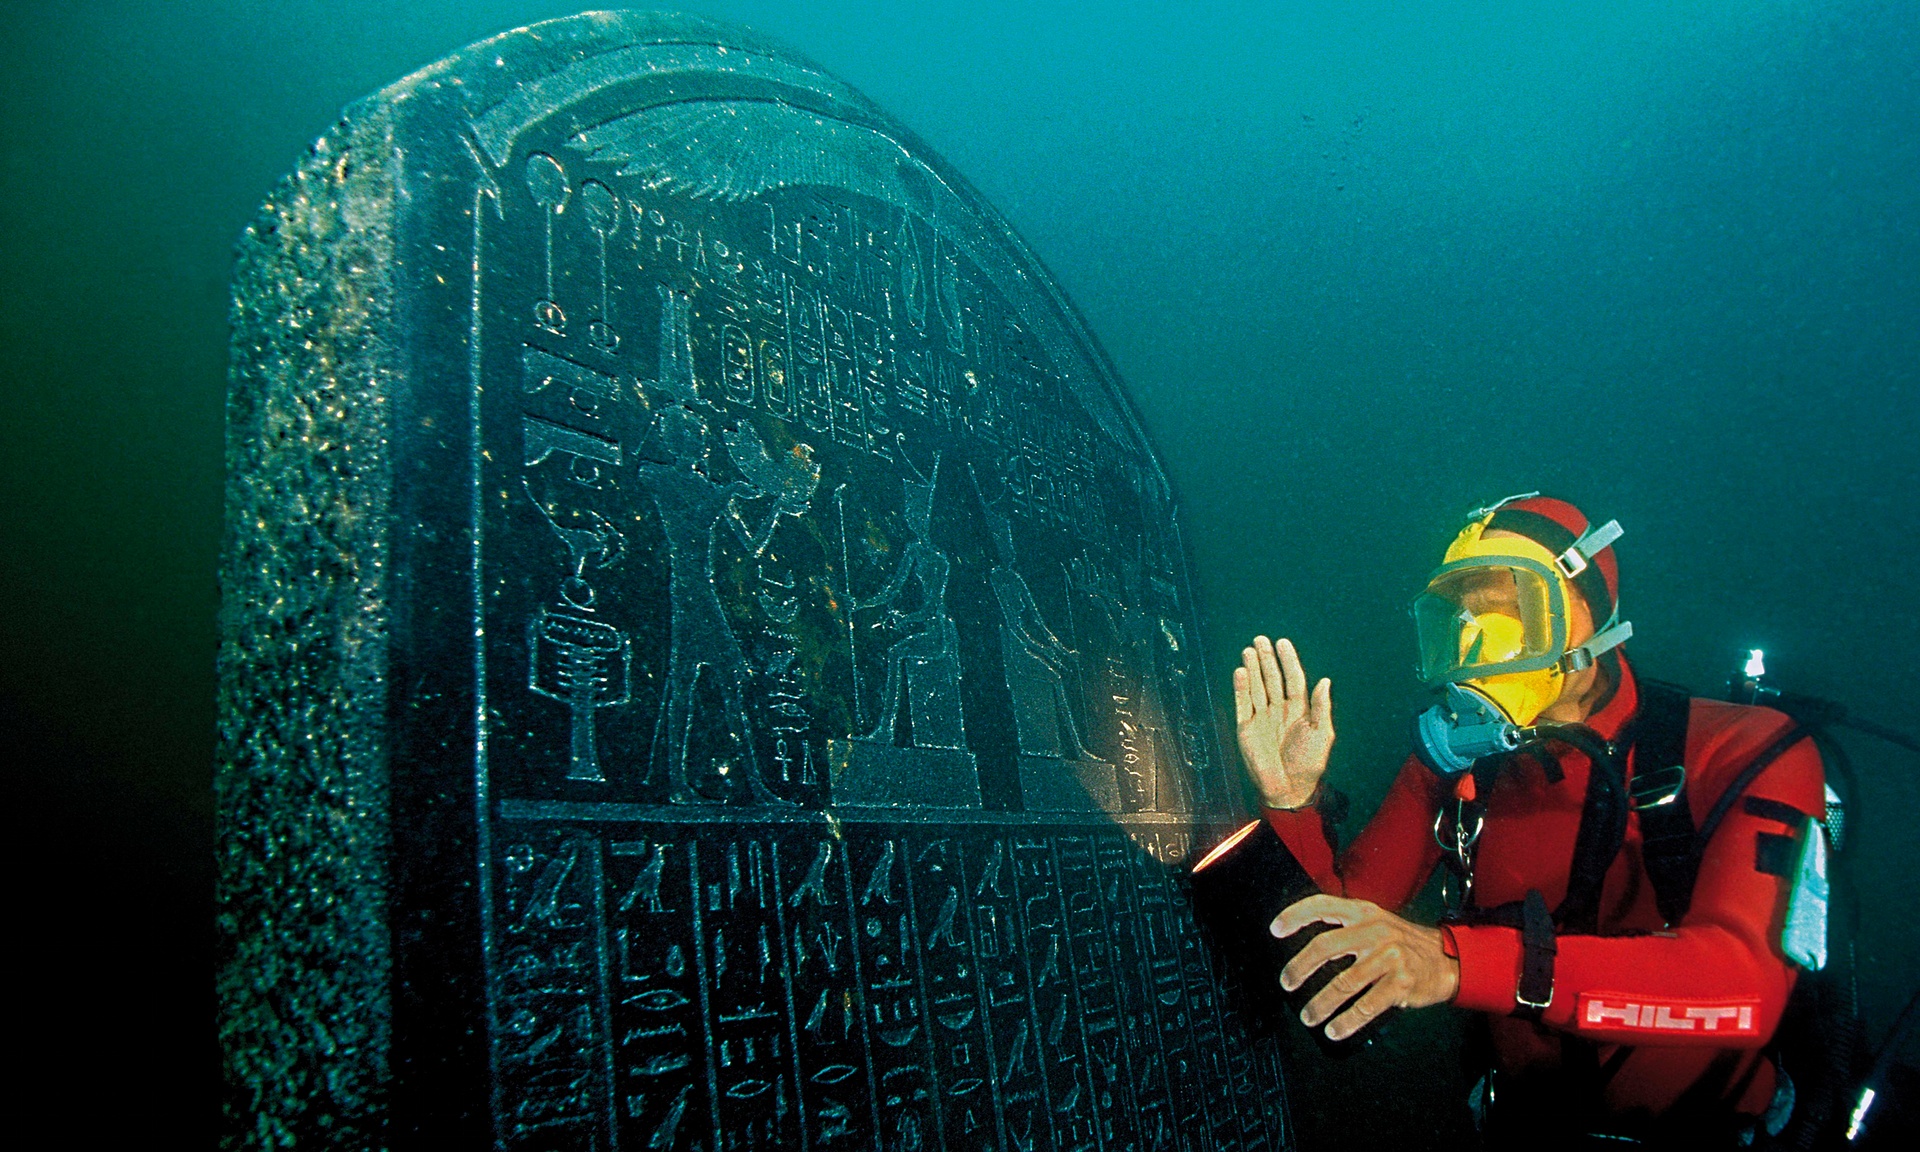  A diver with a large tablet carrying a royal decree from the pharaoh Nectanebo I, which will feature in the British Museum exhibition. Photograph: Christoph Gerigk/Franck Goddio/Hilti Foundation